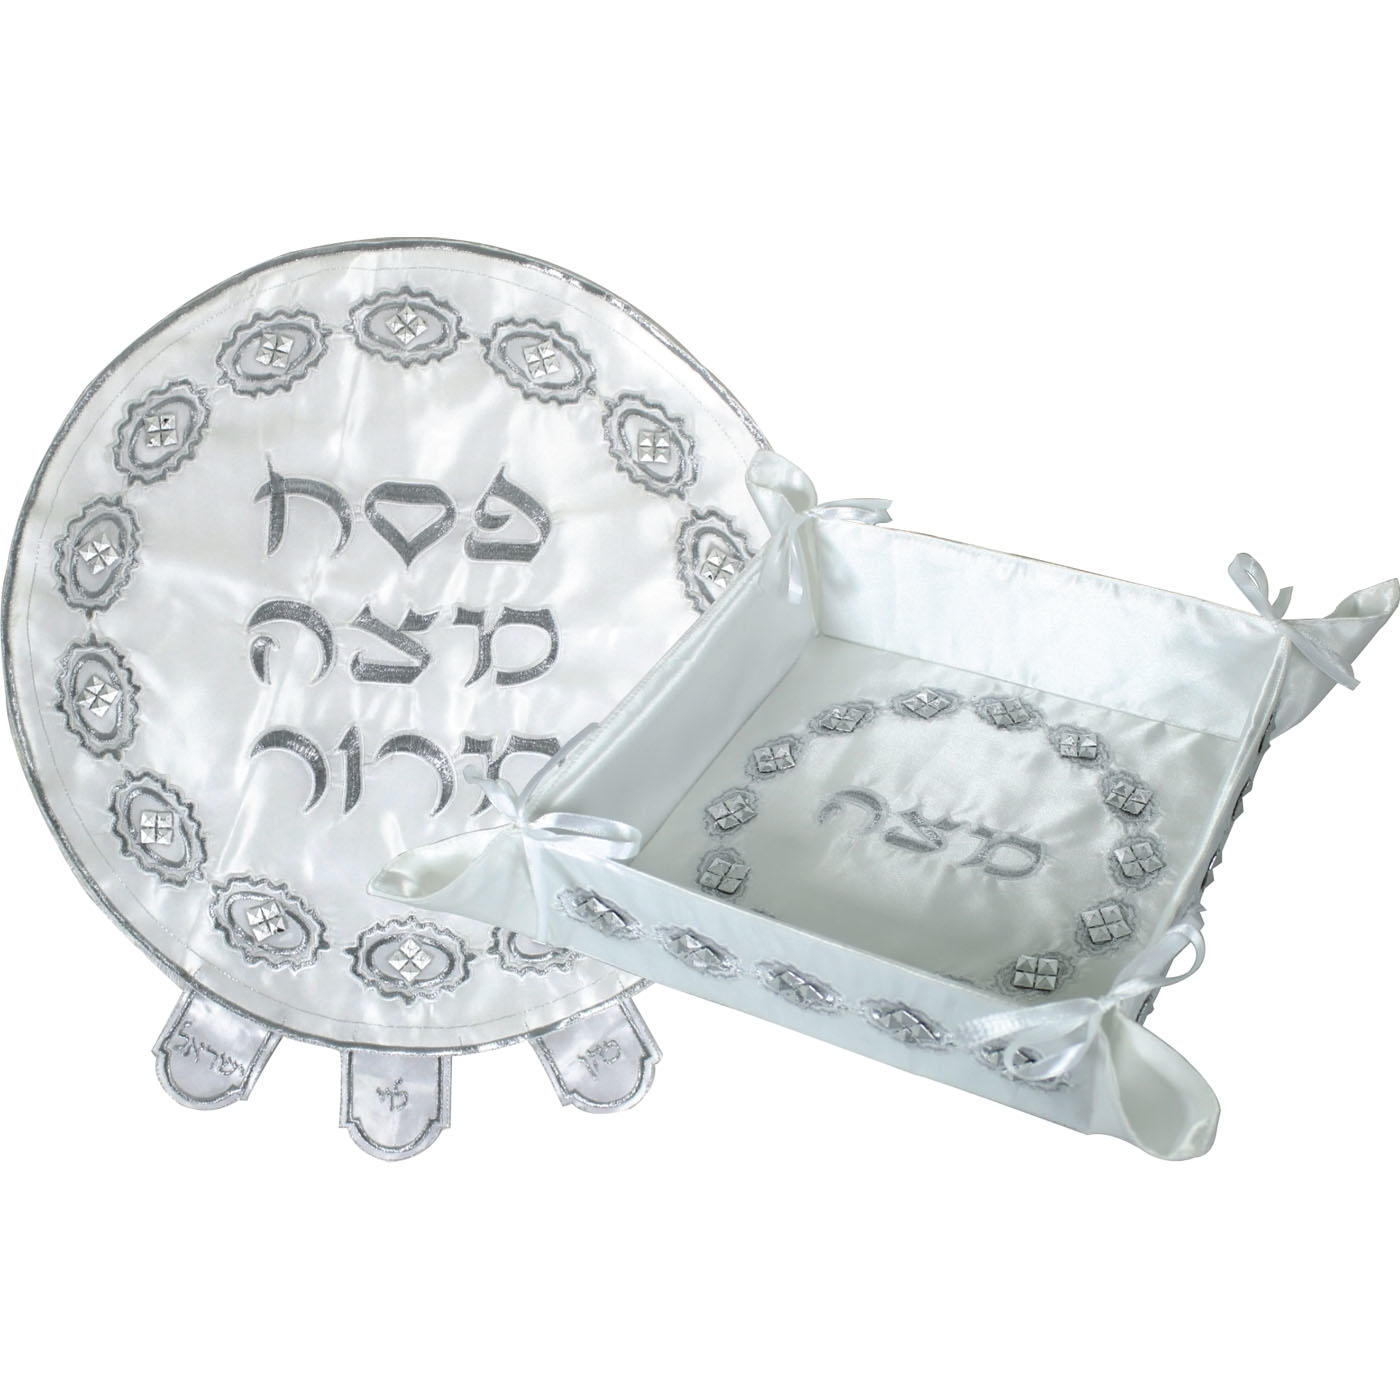 Fabric Passover Set - White with Silver Applique and Embroidery - 1